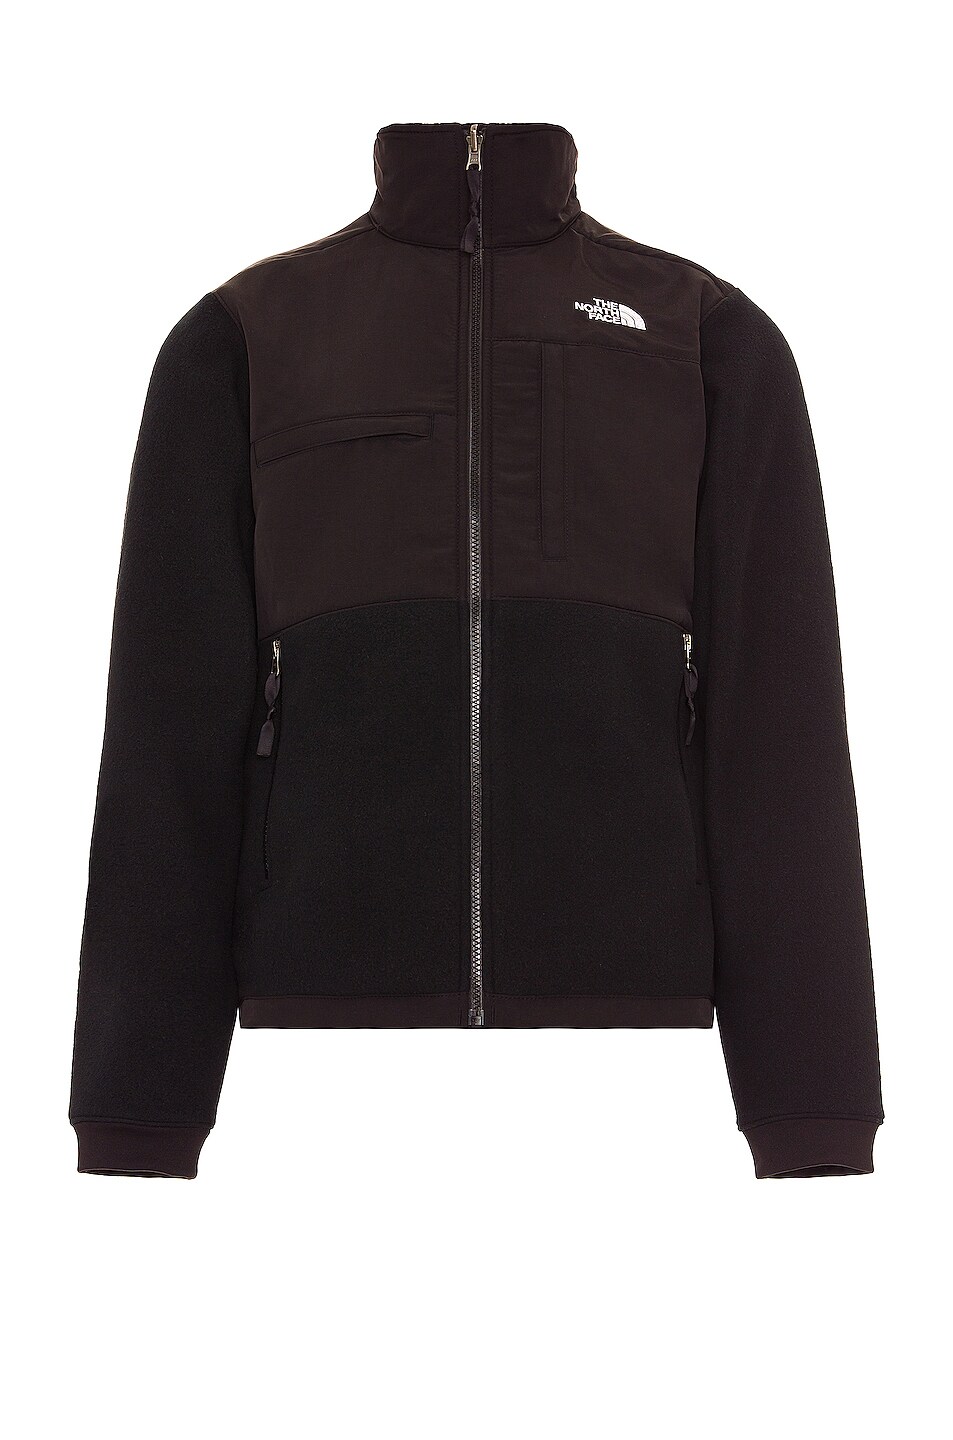 Image 1 of The North Face Denali 2 Jacket in Black